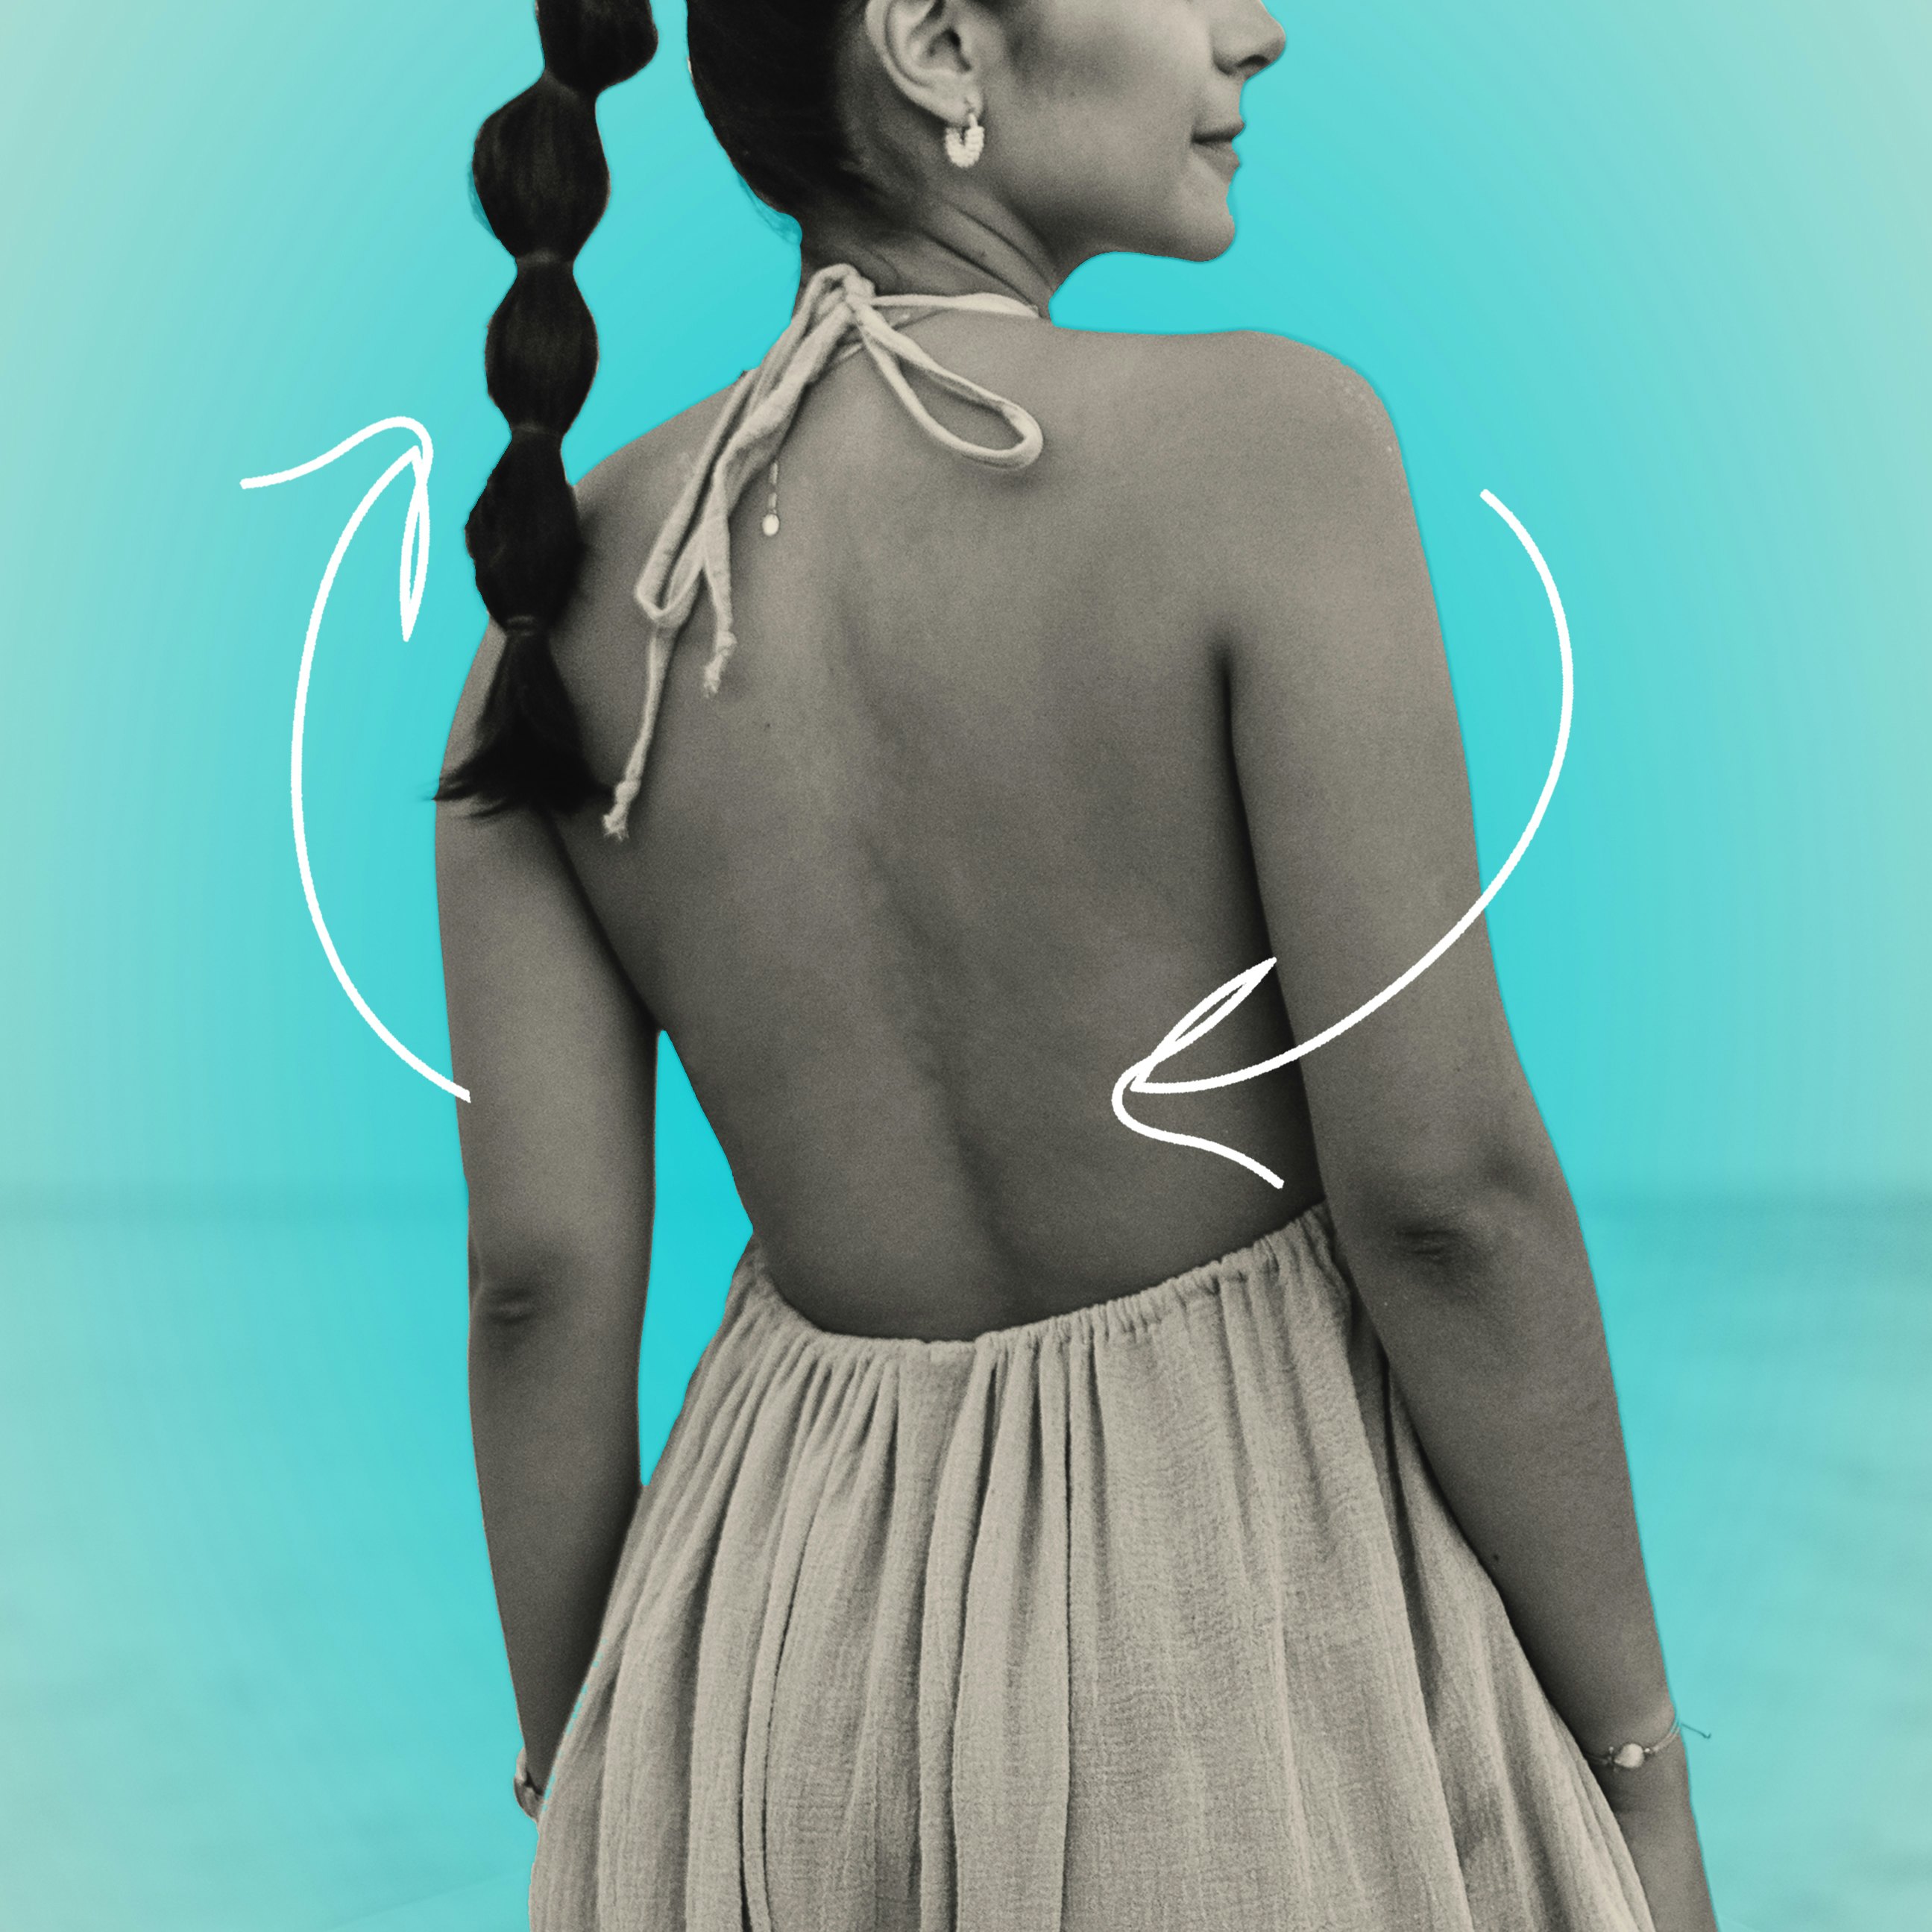 How to Wear a Backless Dress With a Normal Bra  Bras for backless dresses, Dress  bra, Backless bra